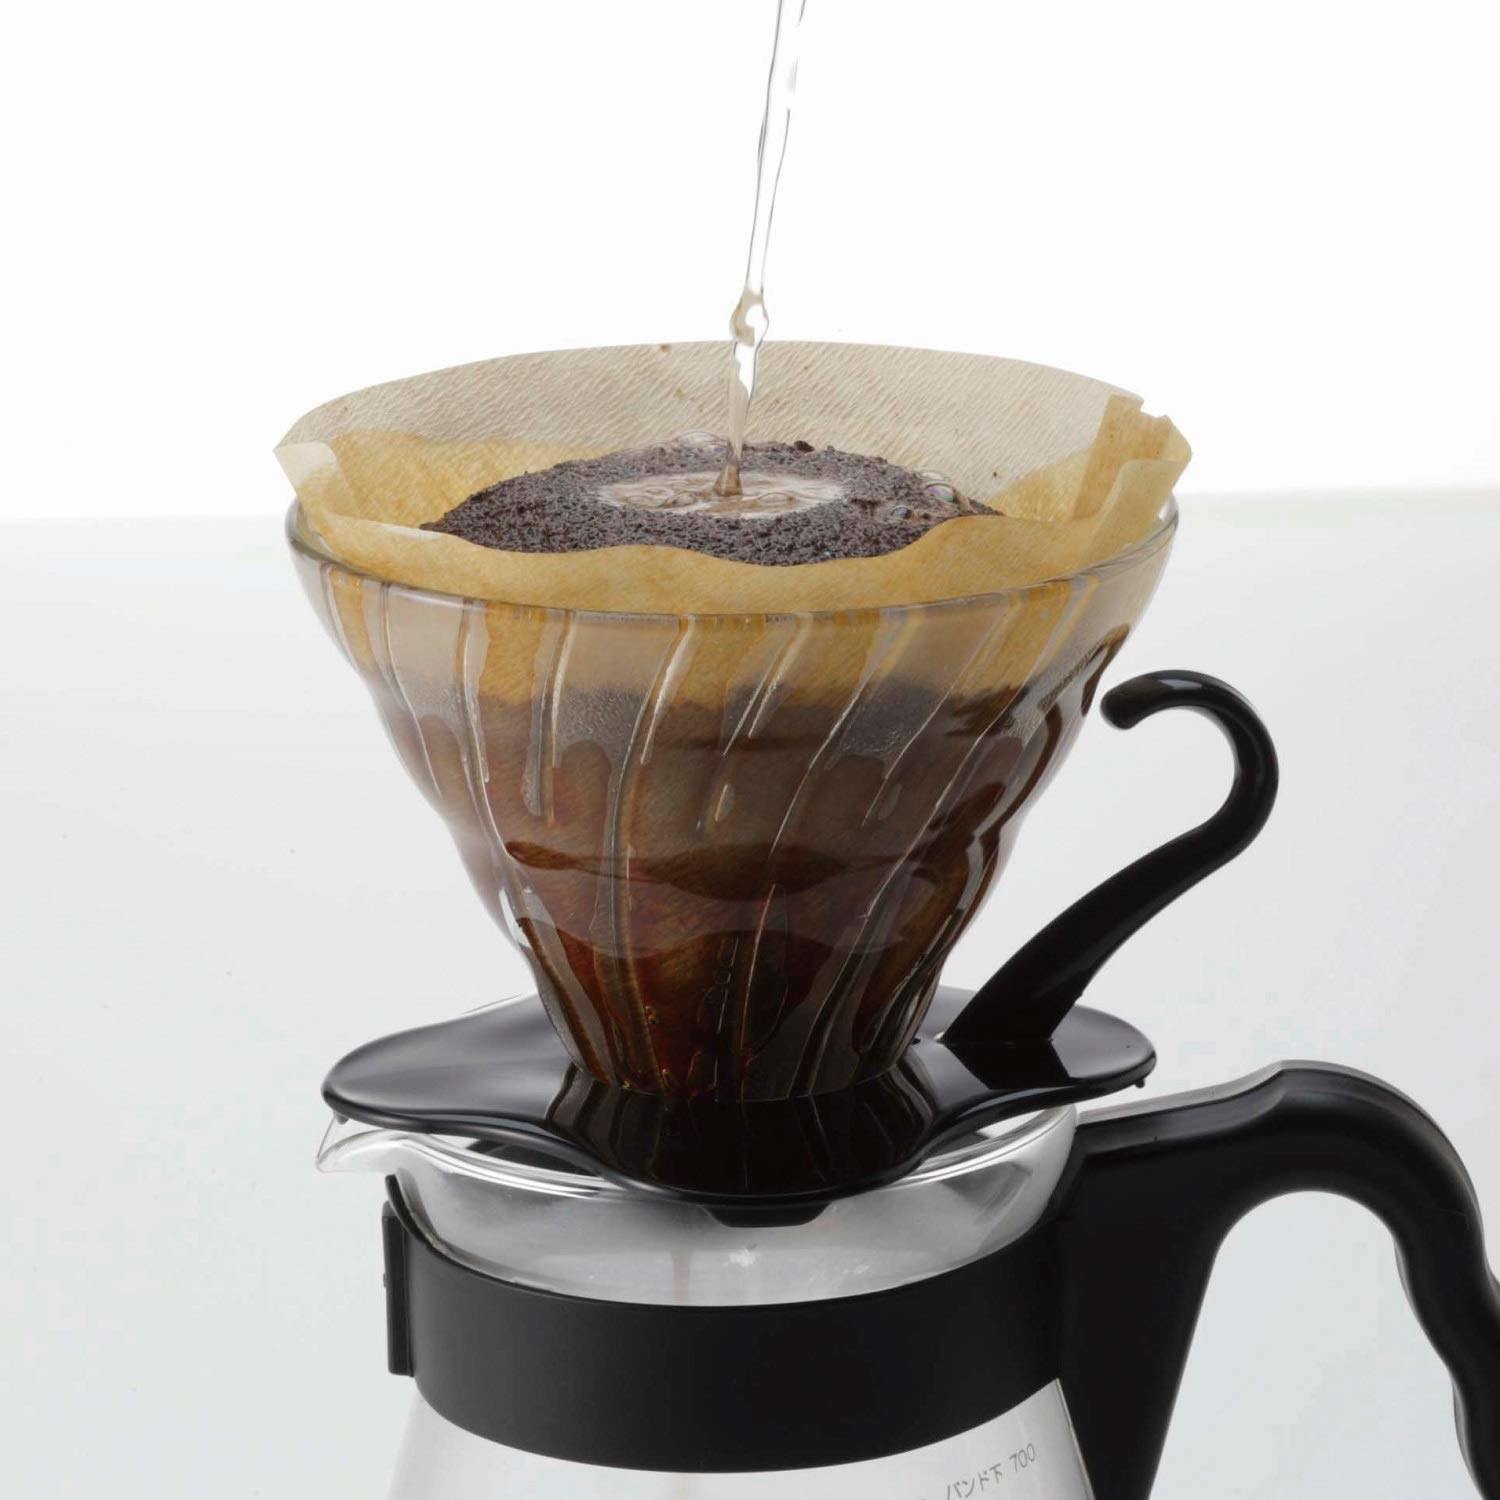 Pour over coffee maker 